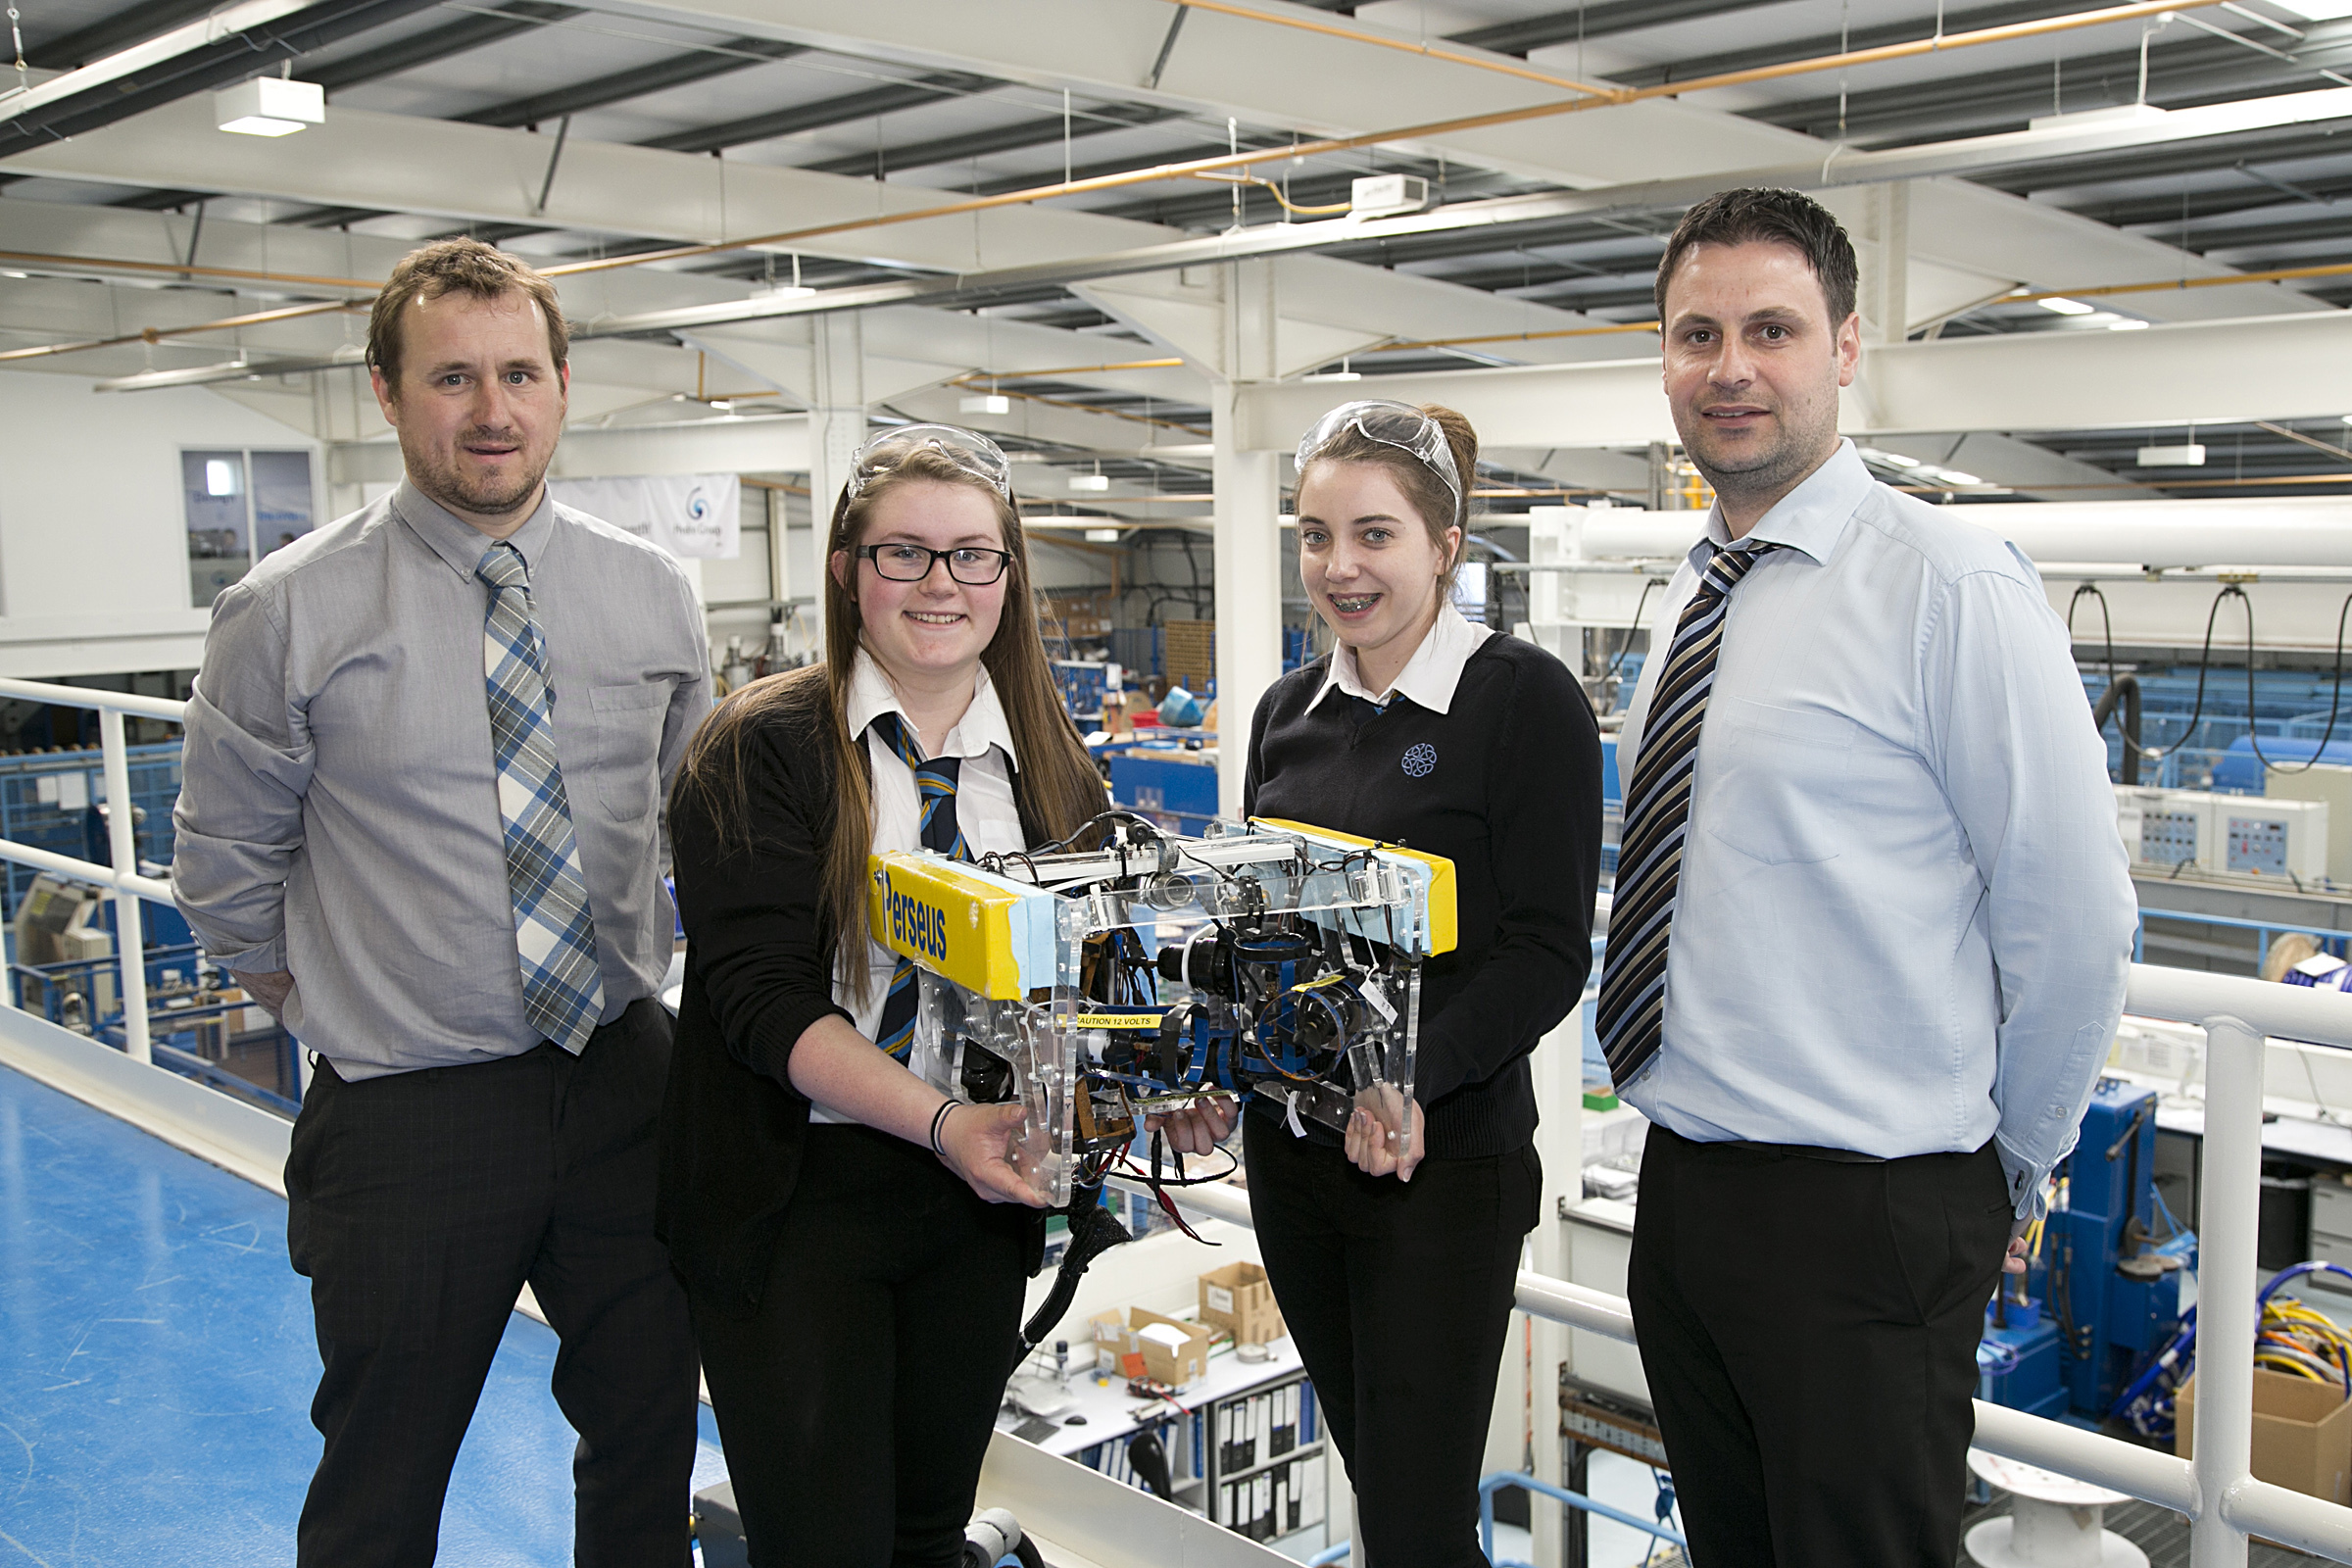 Ali Hynd, principal head of technology for Mintlaw Academy, with Erin Kindness (15) and Joanne McDonald (15) of Mintlaw Academy, and Craig Reid, production manager Hydro Group